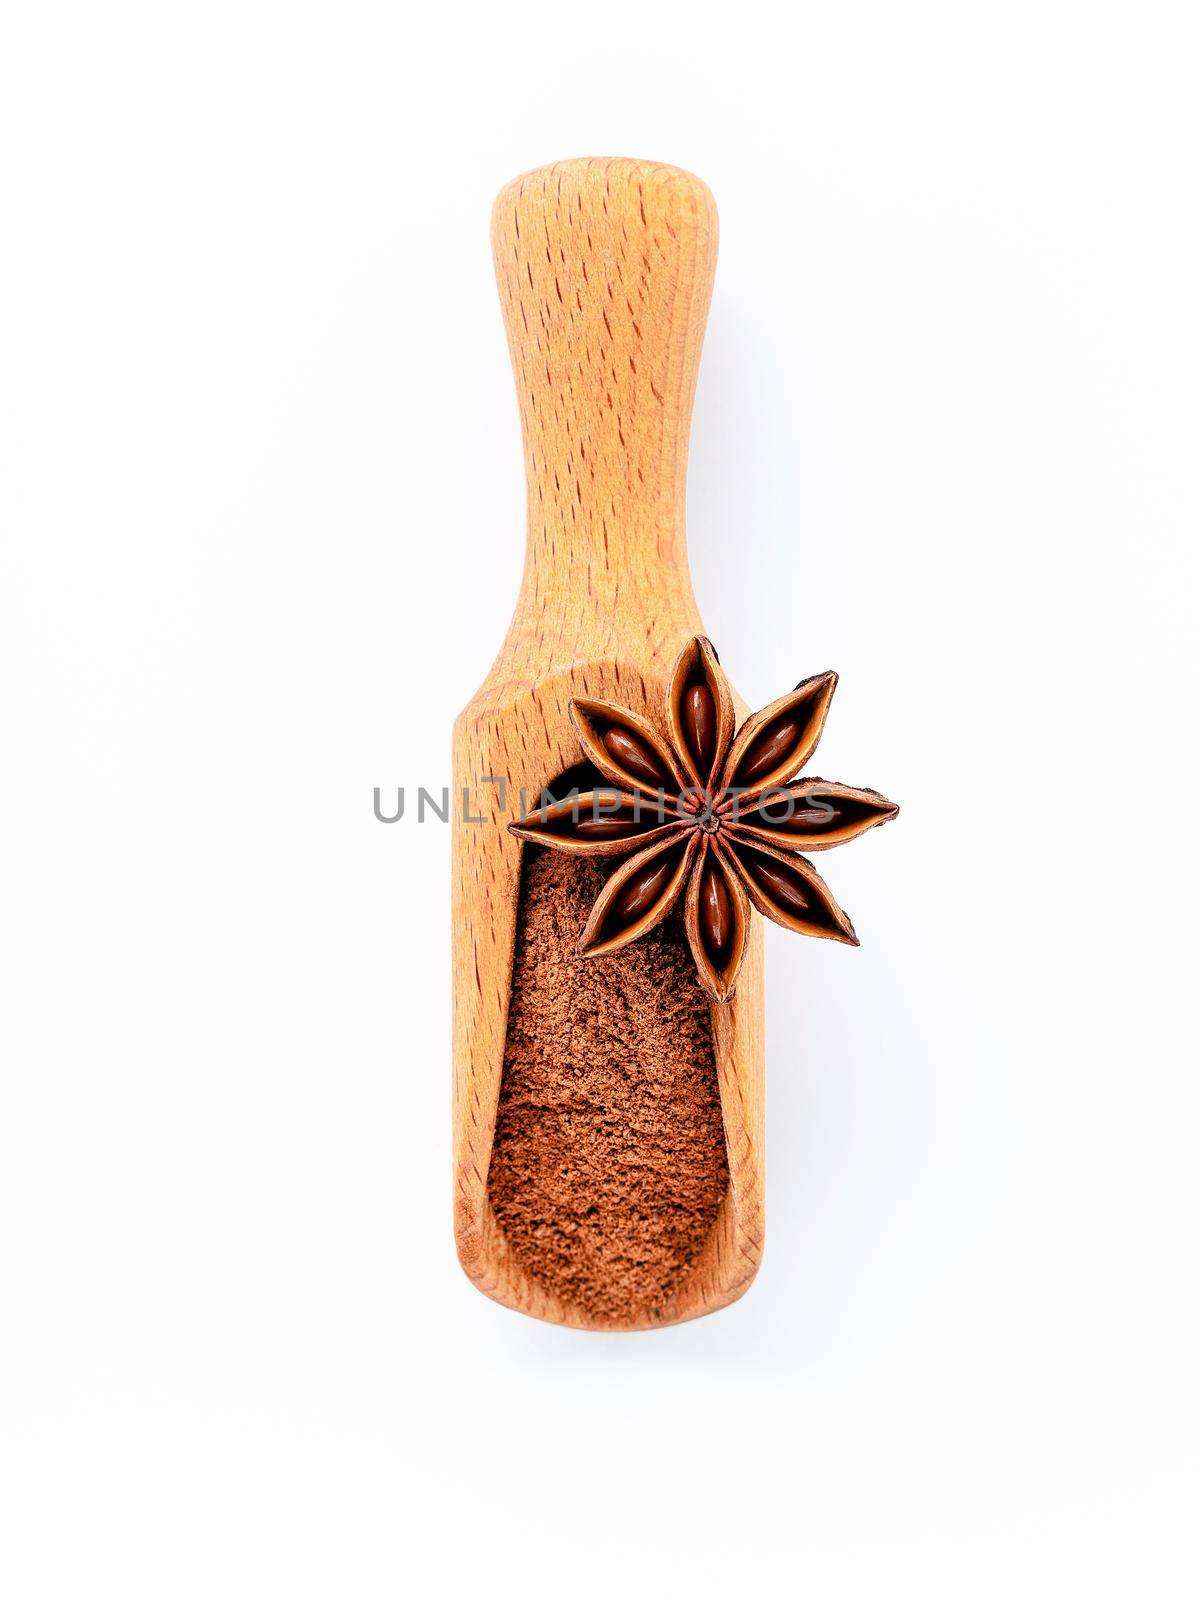 Close up chinese star anise in wooden scoop  isolate on white background. Dried star anise spice fruits top view and copy space. by kerdkanno